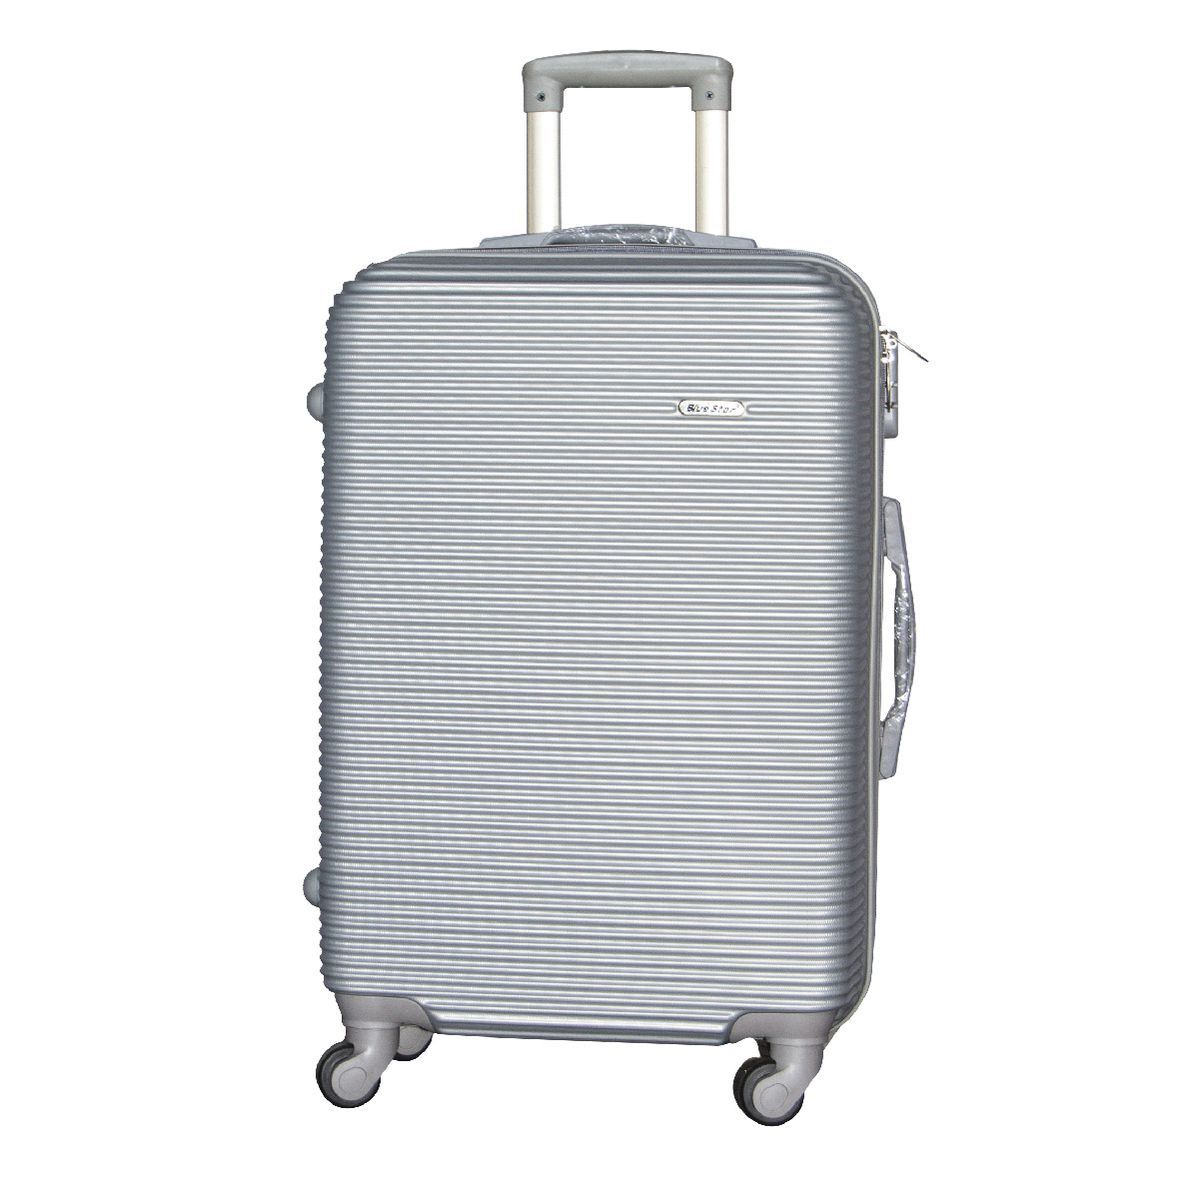 1 Piece Hard Outer Shell Luggage 23"